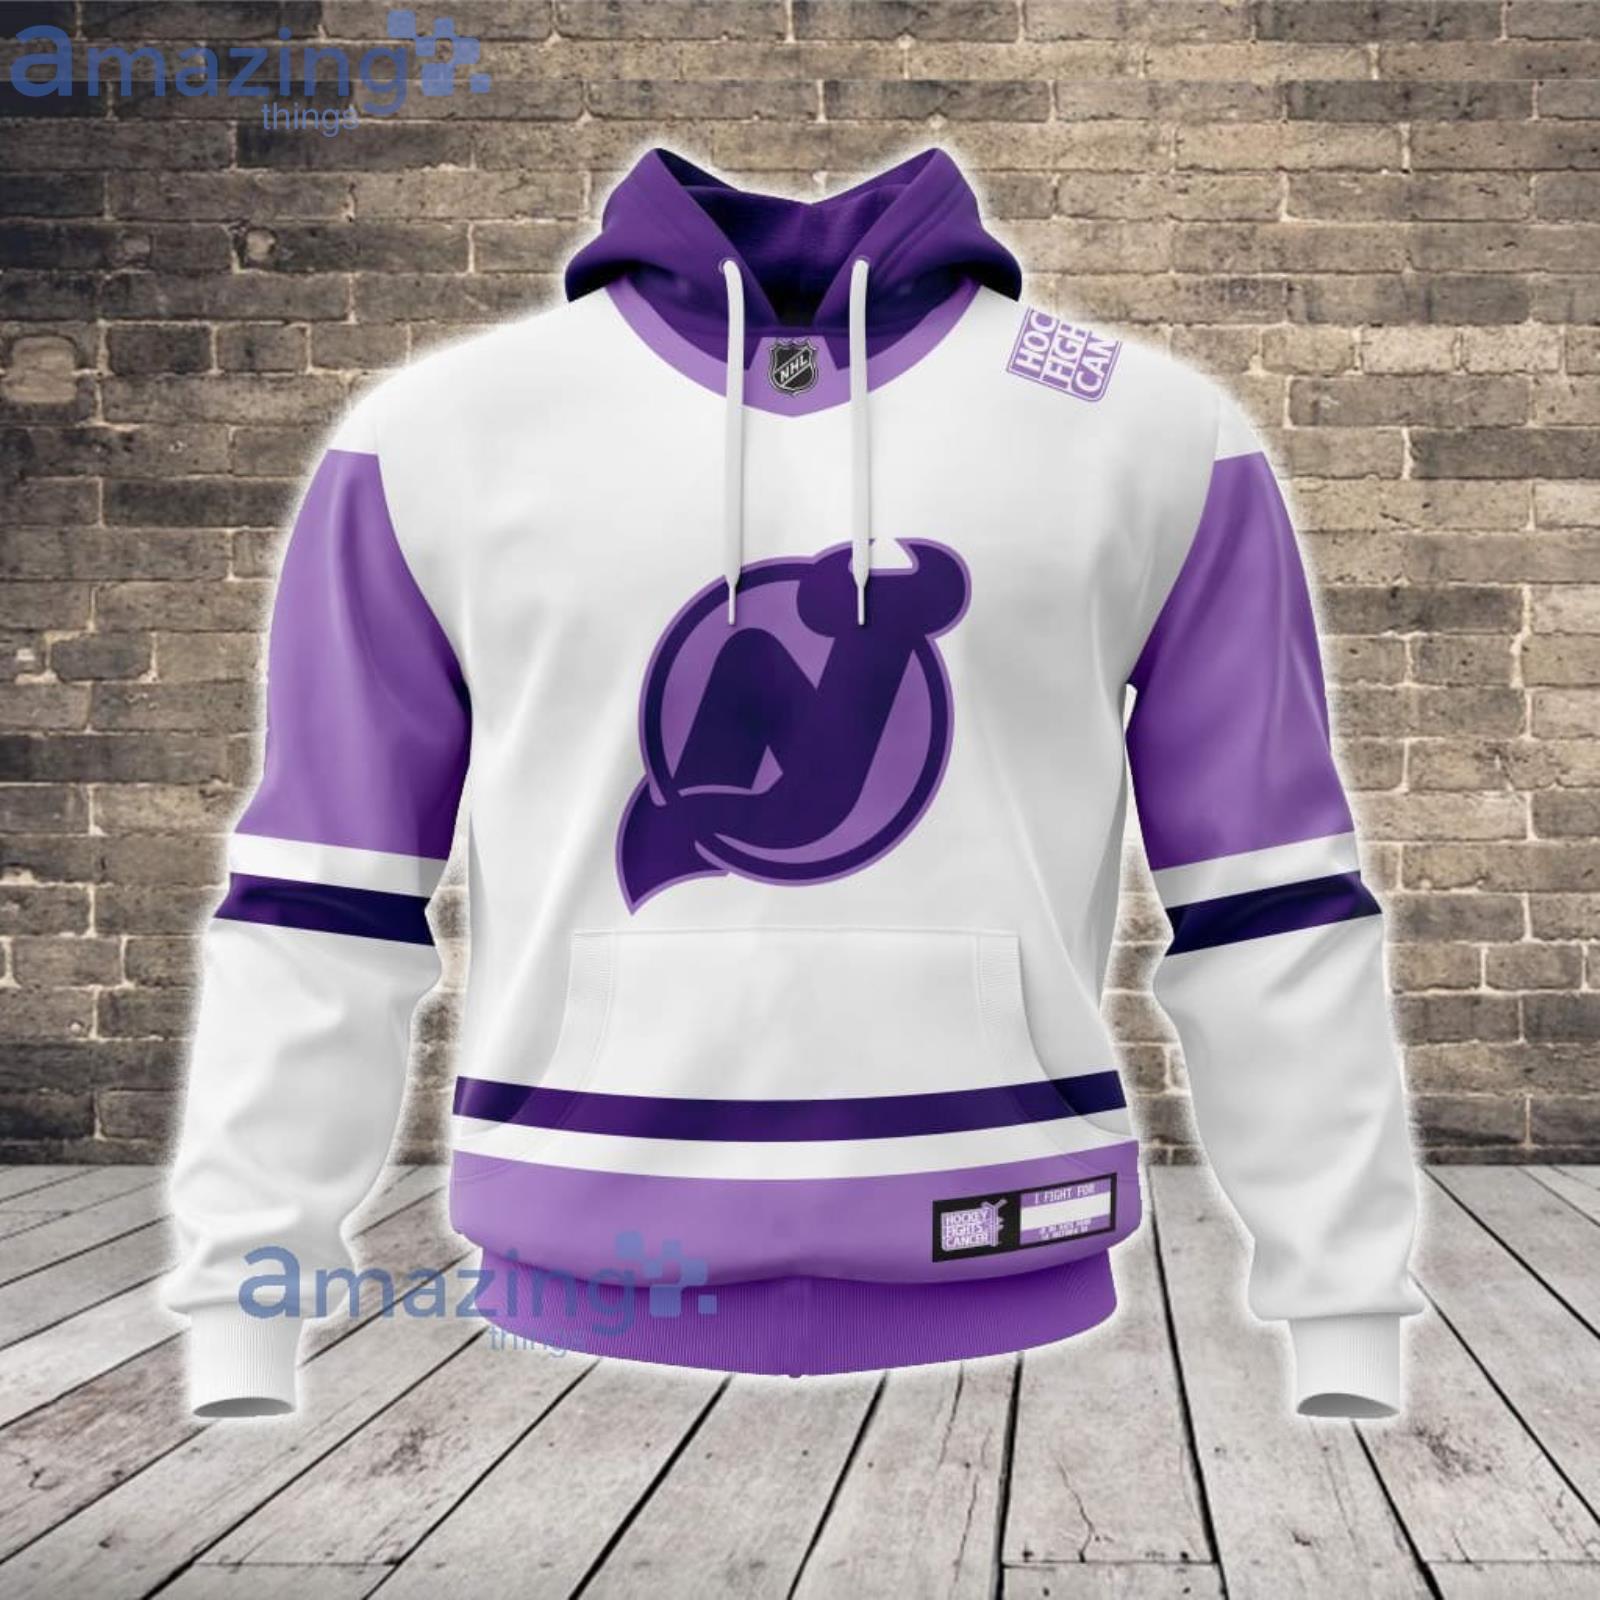 new jersey devils cancer jersey